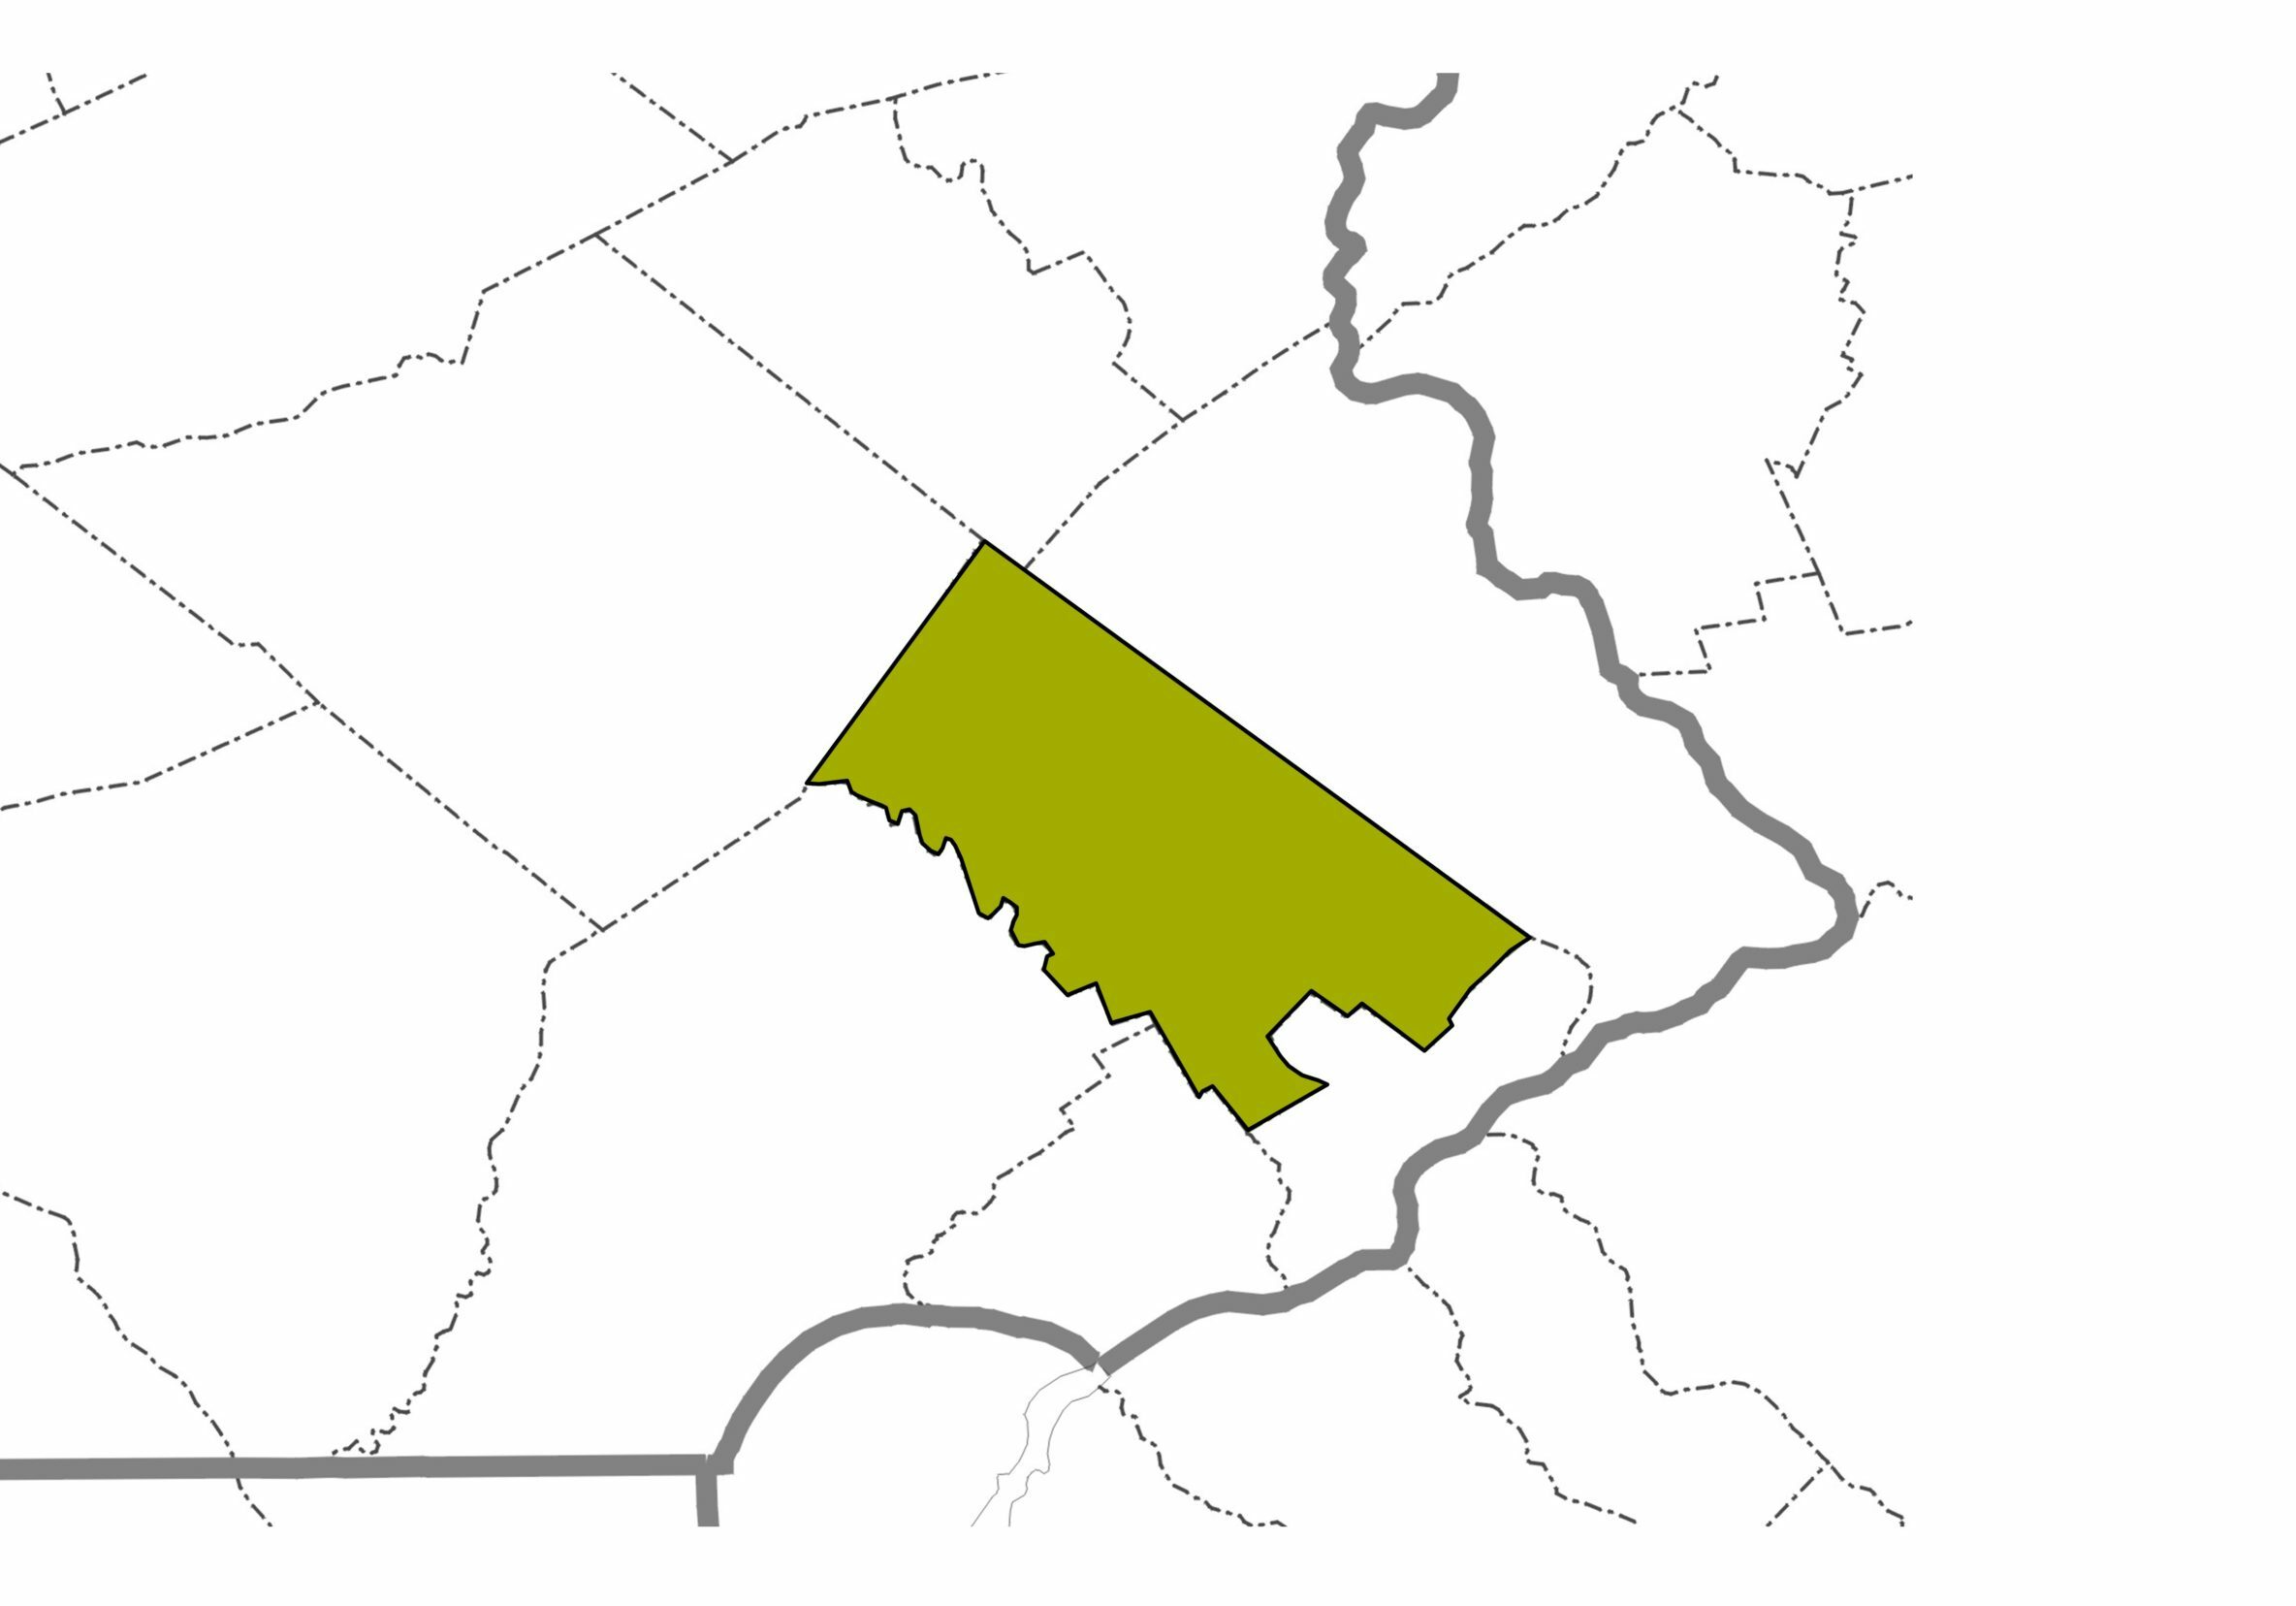 Montgomery County Highlighted on Local Map That Shows County Borders